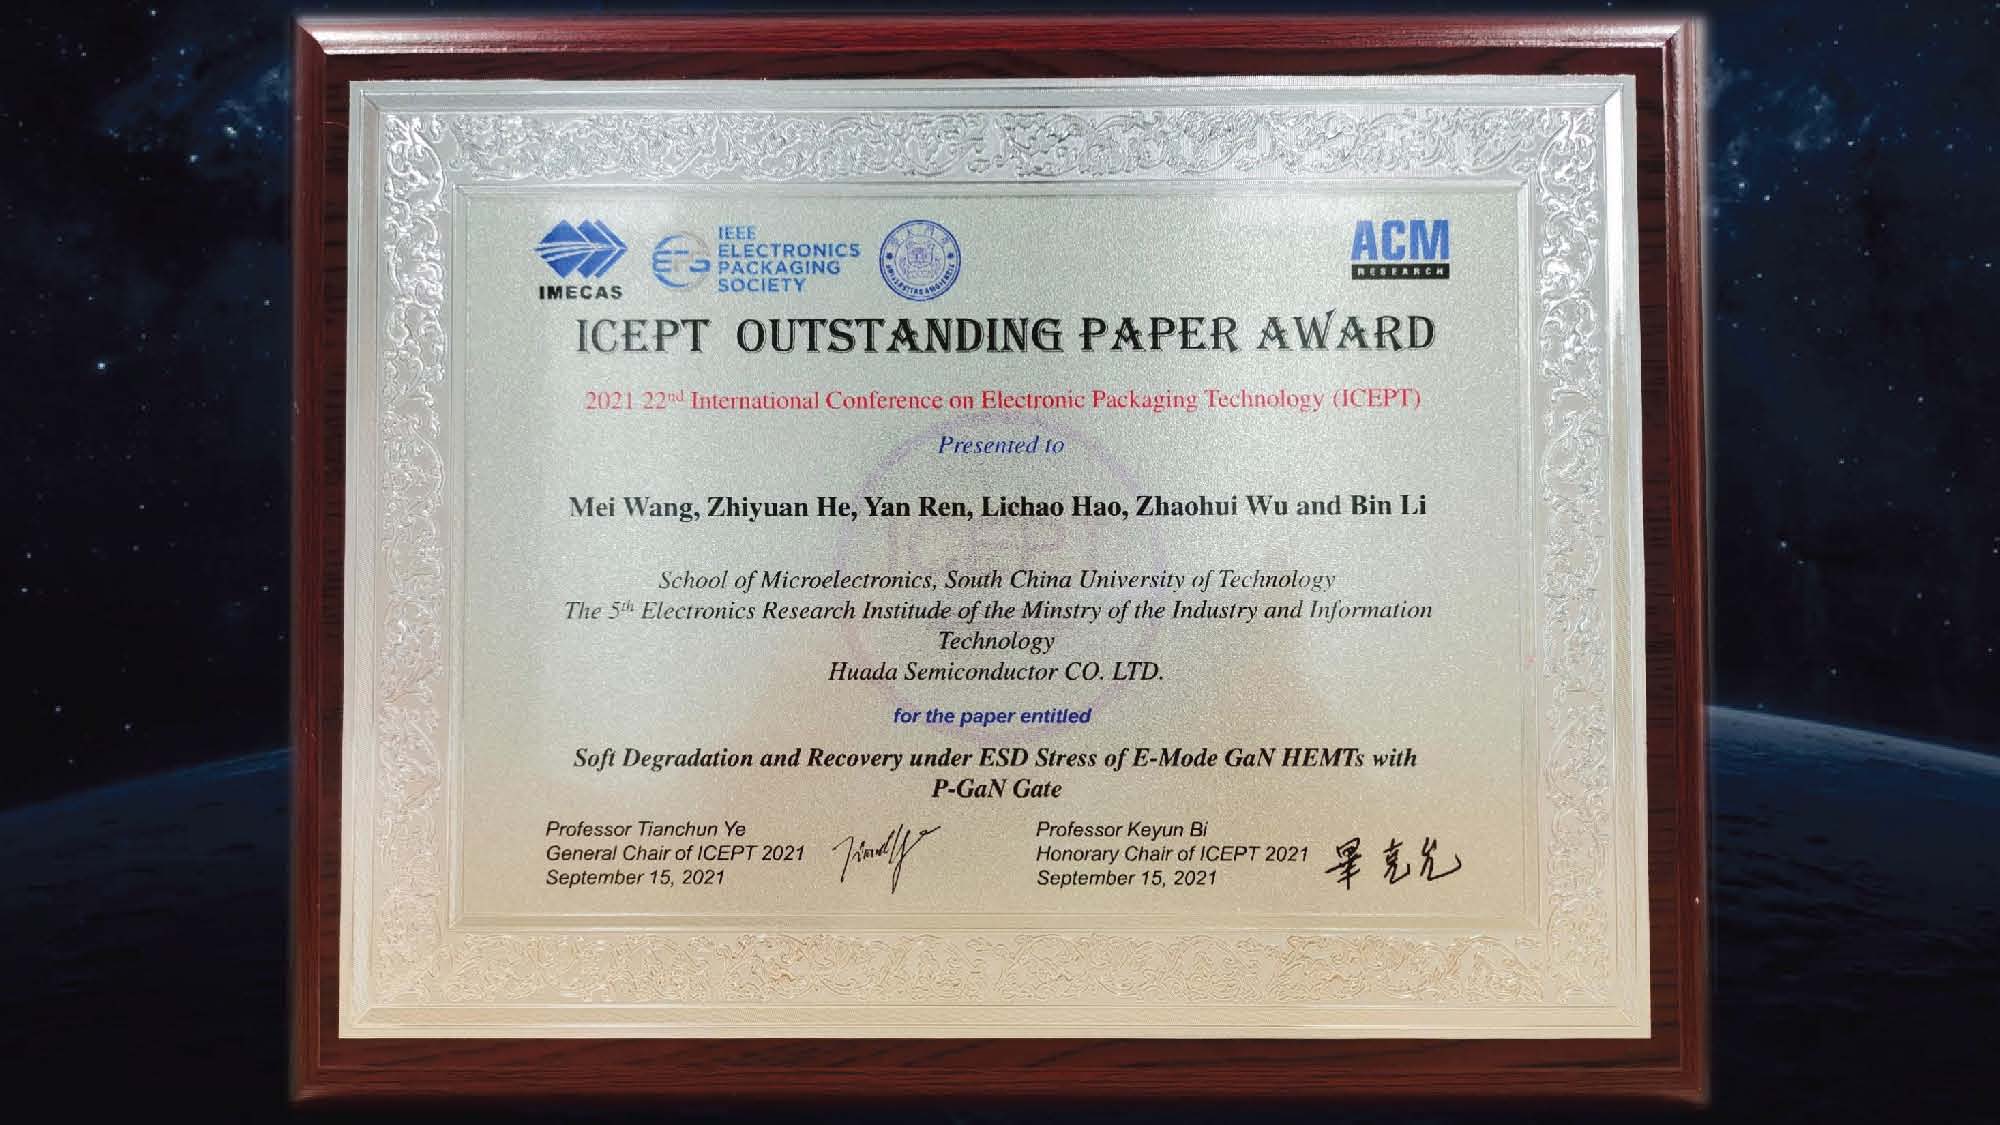 ICEPT OUTSTANDING PAPER AWARD